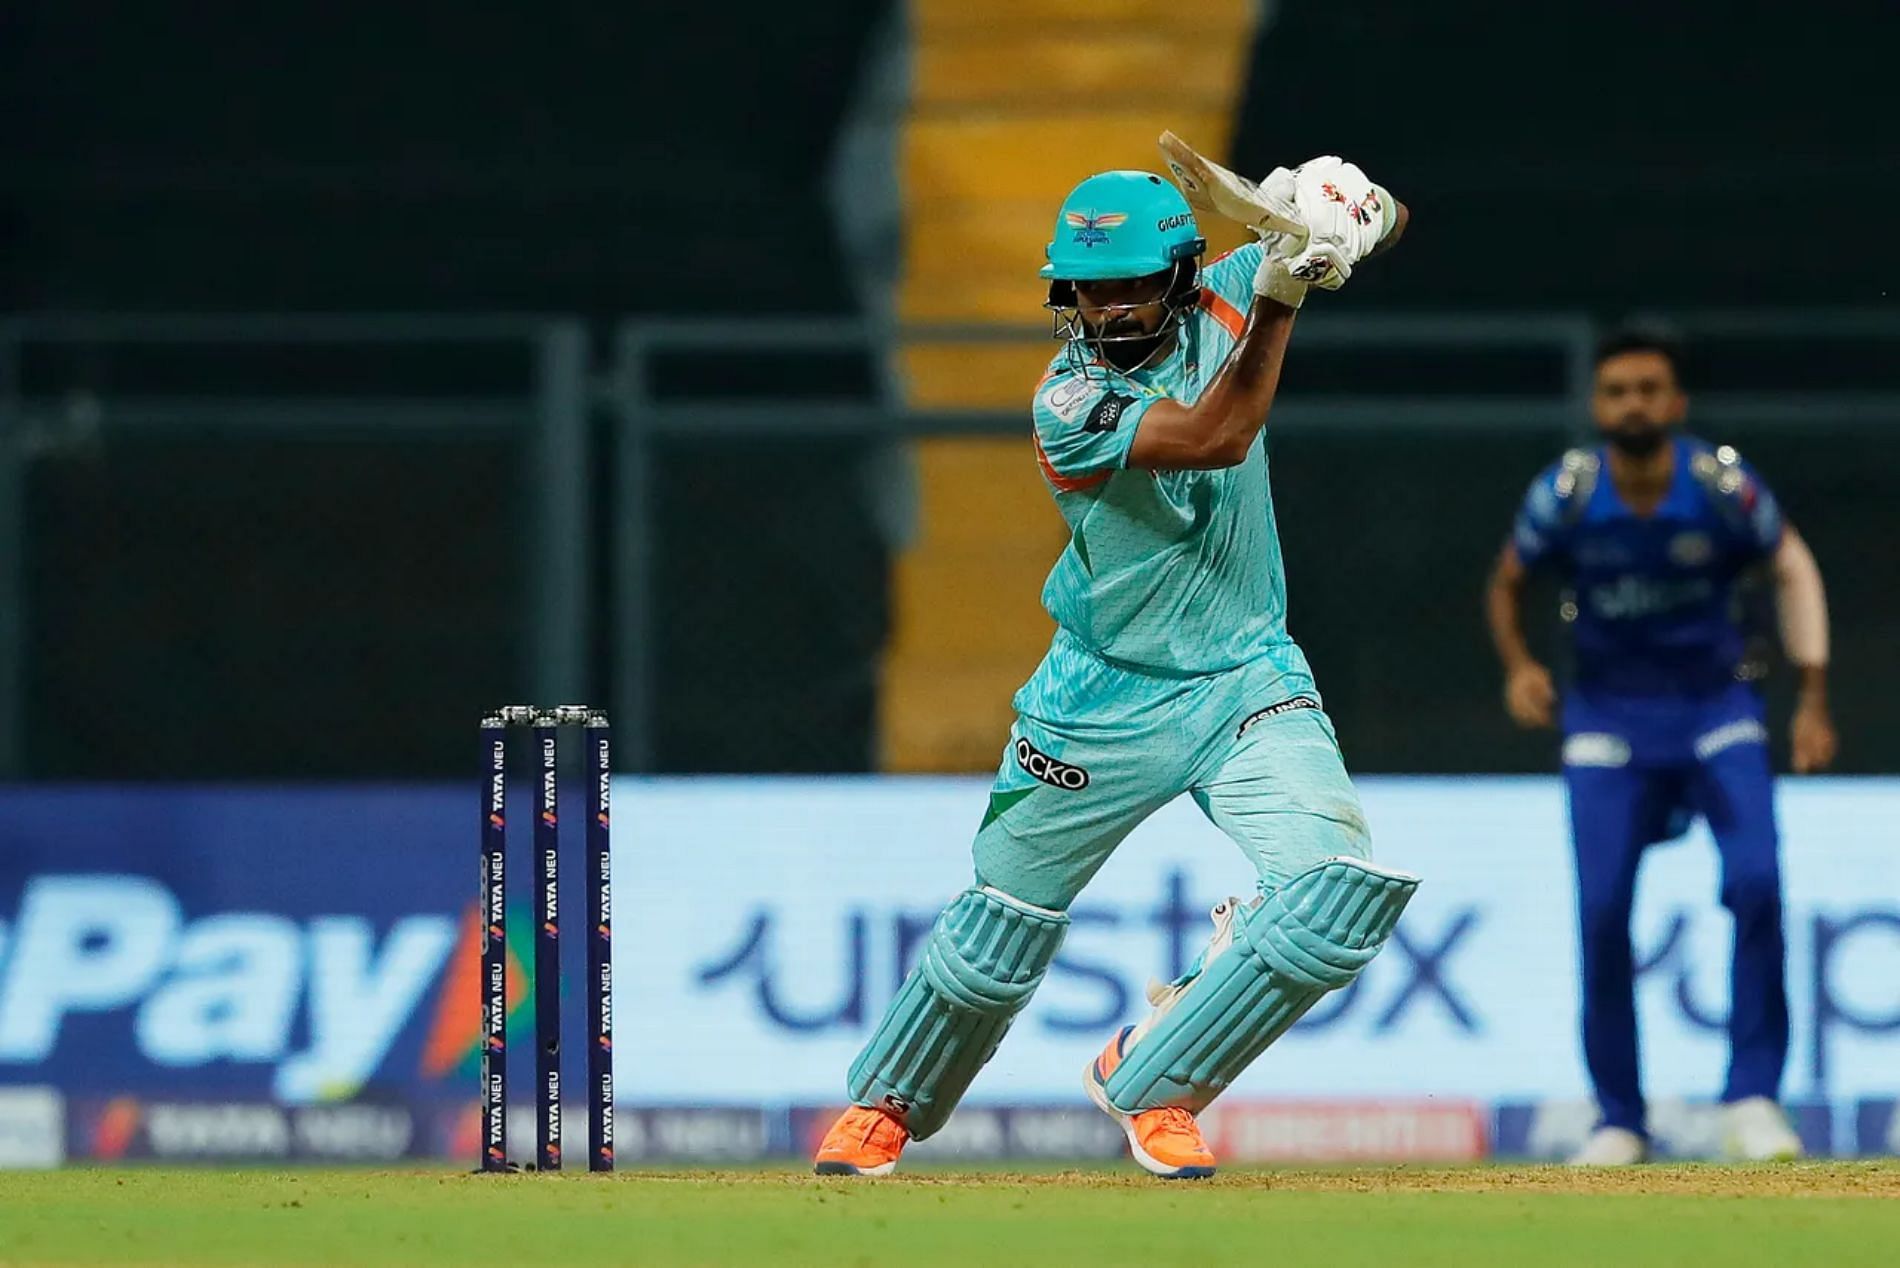 KL Rahul scored his second ton of IPL 2022. Both his hundreds have come against MI. Pic: IPLT20.COM